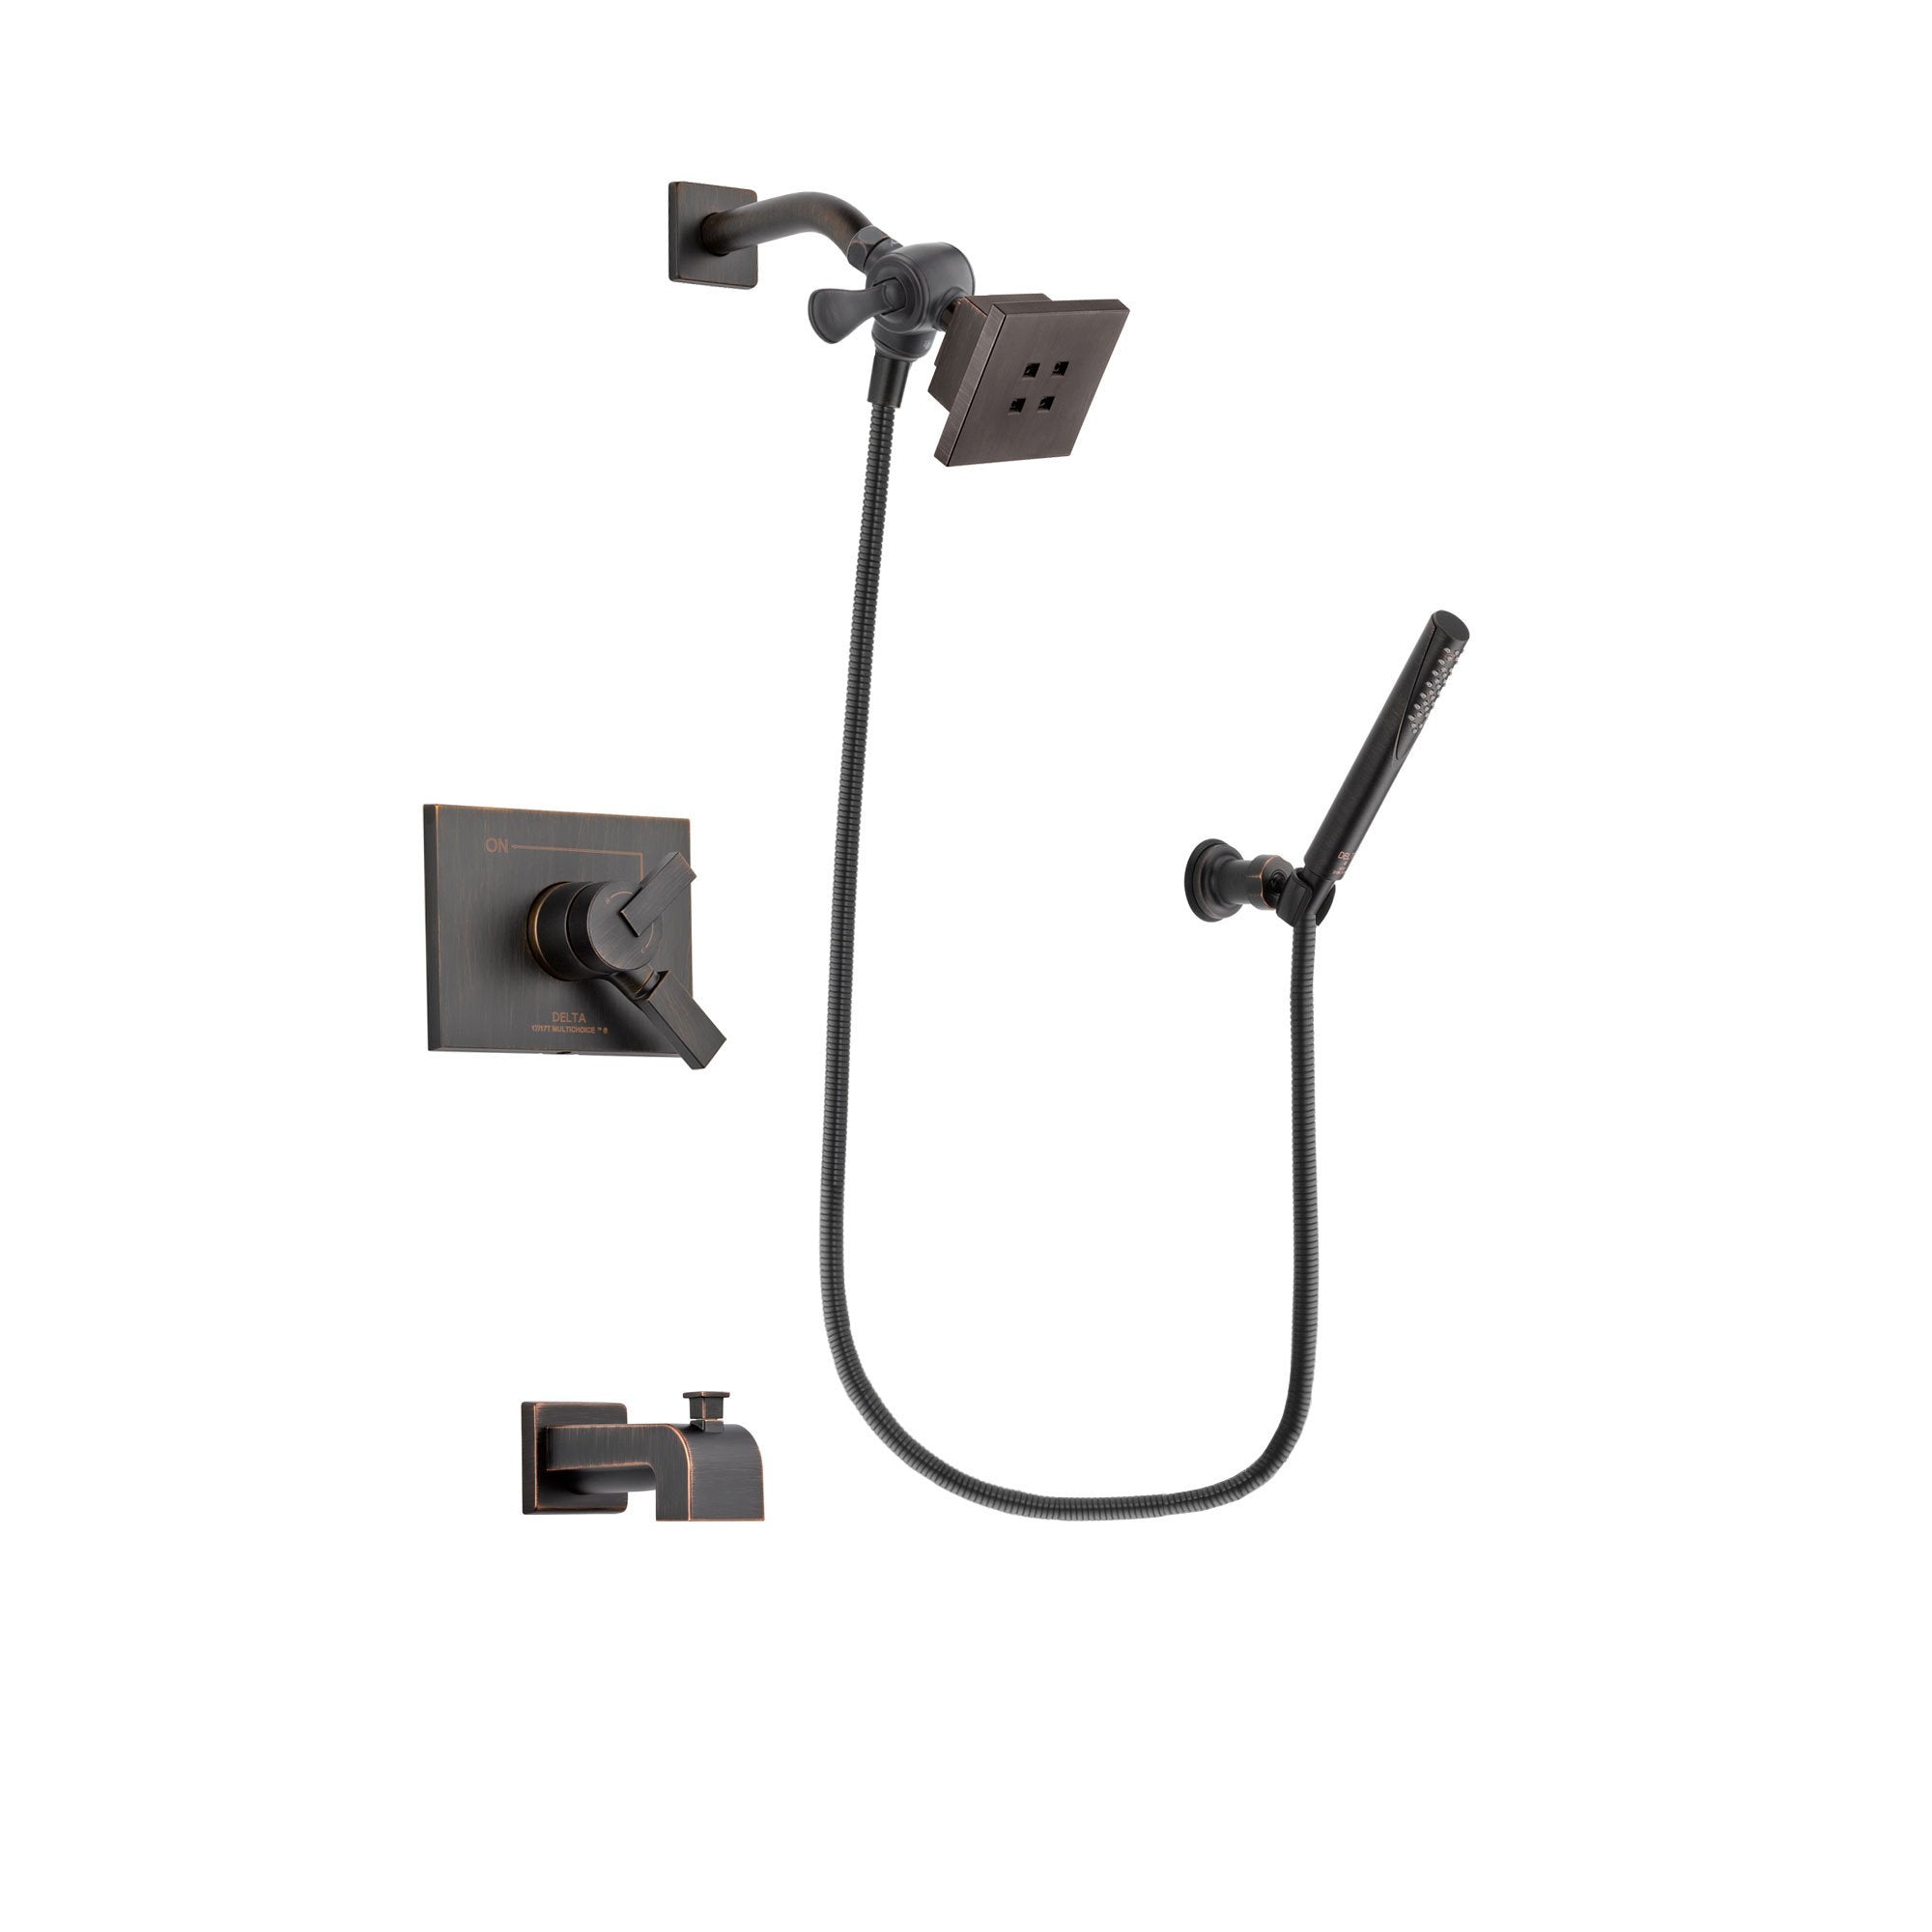 Delta Vero Venetian Bronze Finish Dual Control Tub and Shower Faucet System Package with Square Showerhead and Cylindrical Wall-Mount Handheld Shower Stick Includes Rough-in Valve and Tub Spout DSP3291V